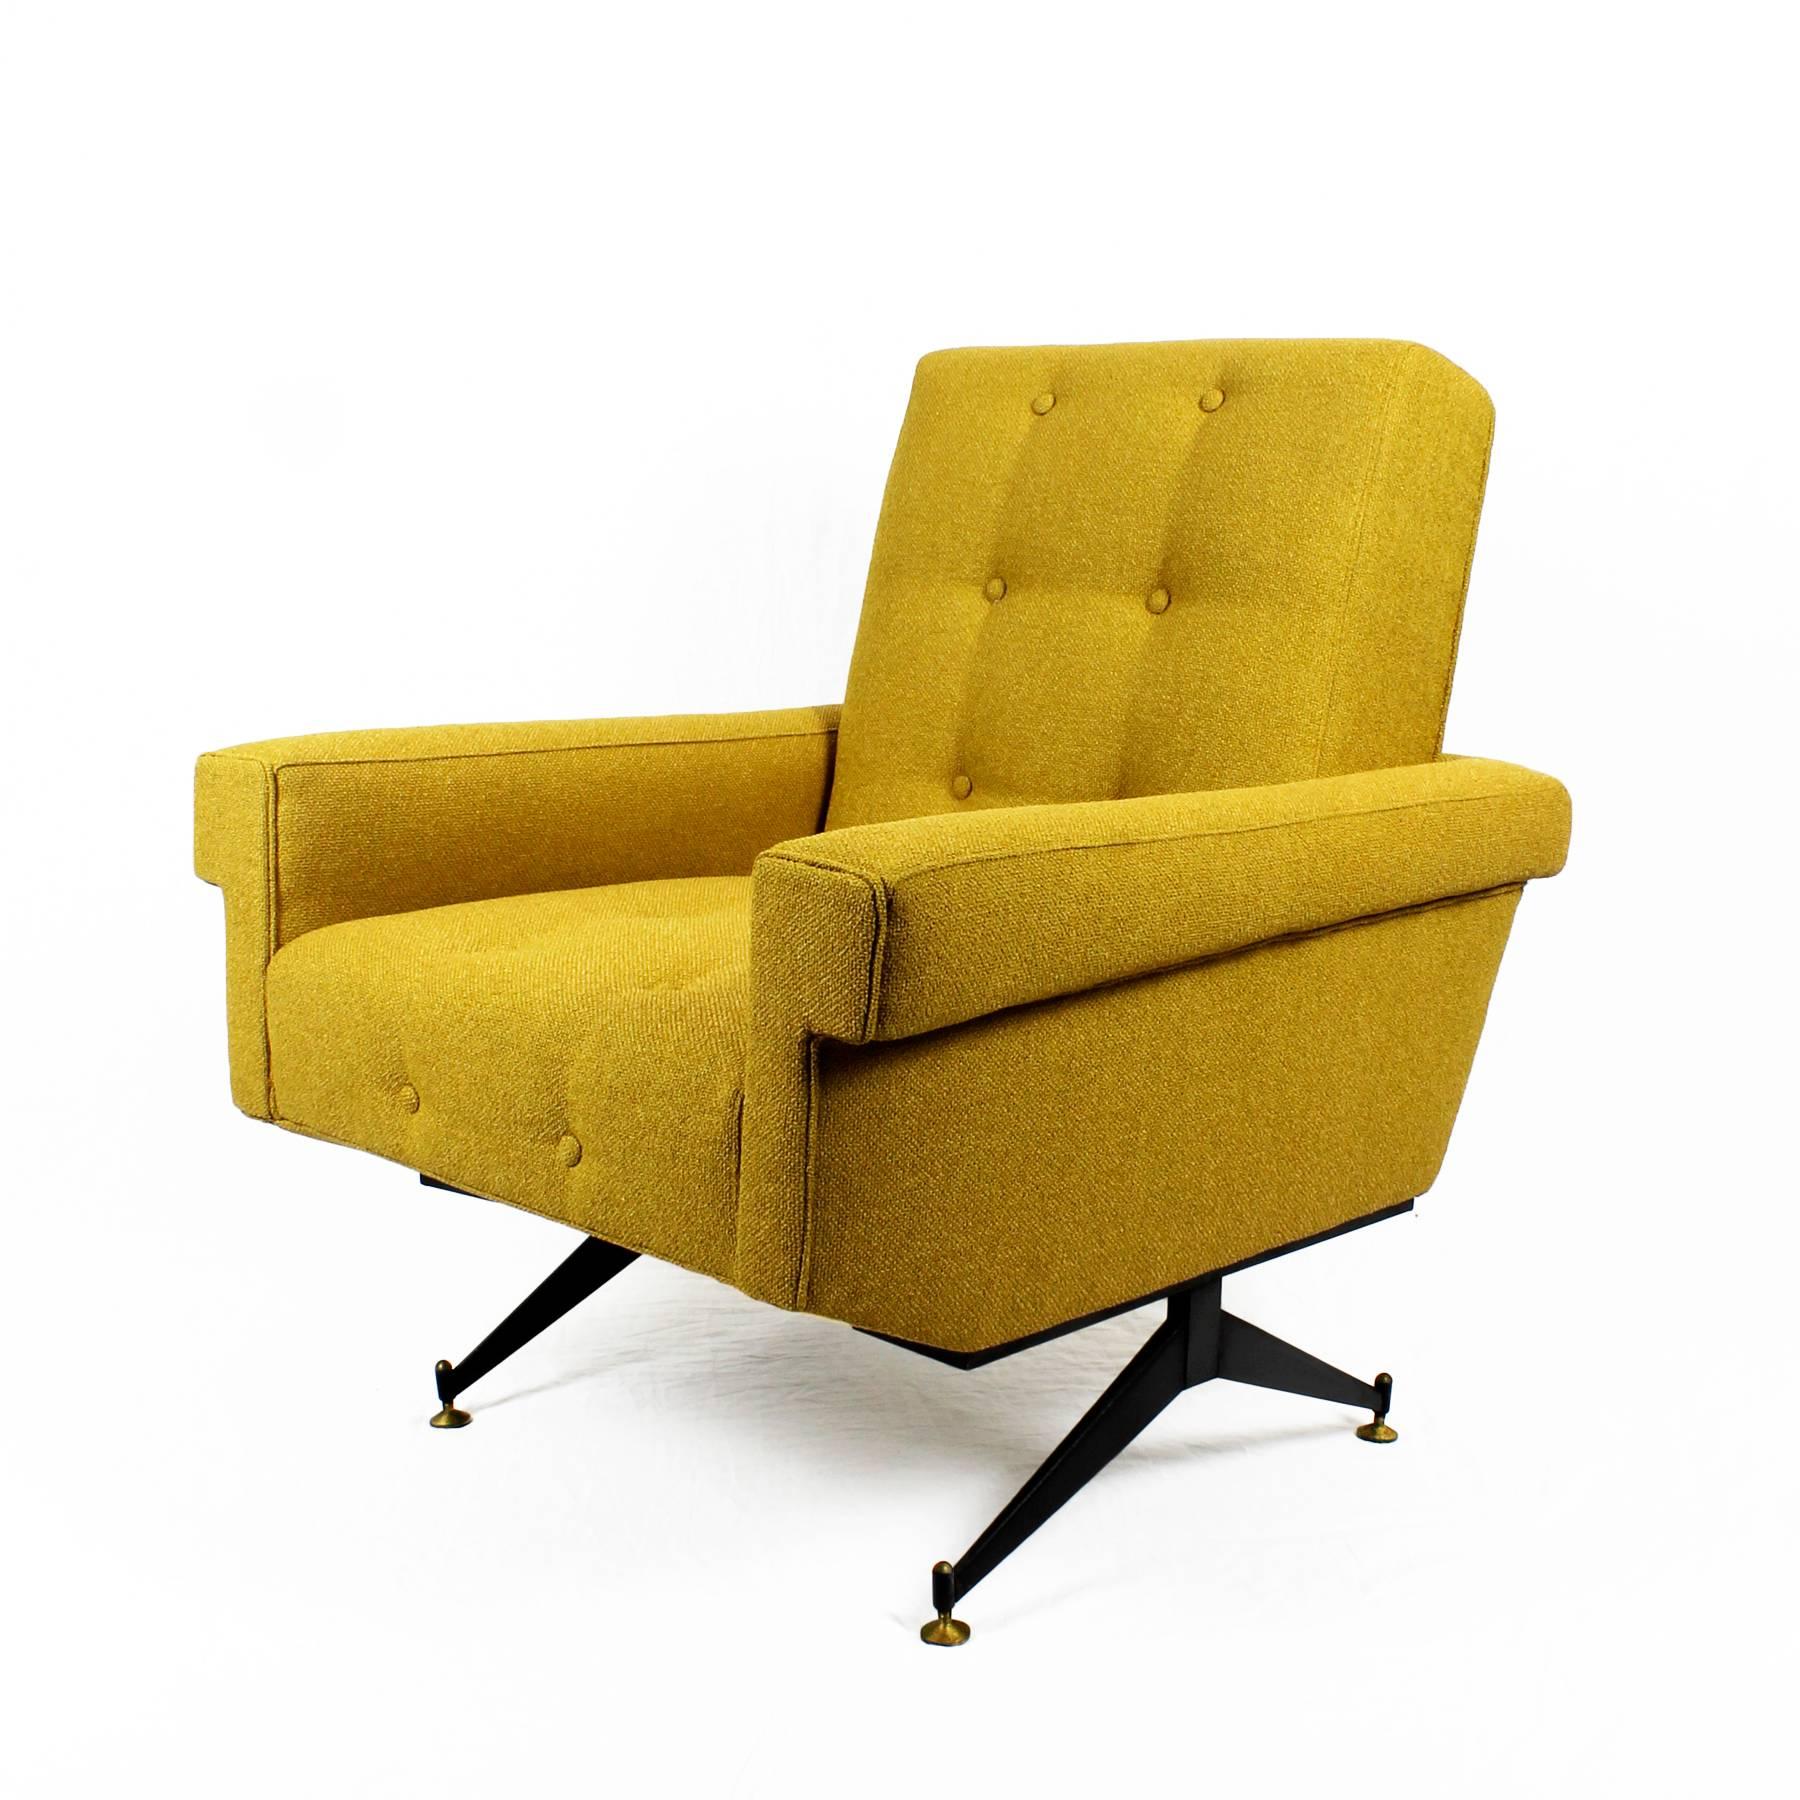 Italian Pair of Mid-Century Modern Padded Armchairs With Yellow-Mustard Fabric - Italy For Sale